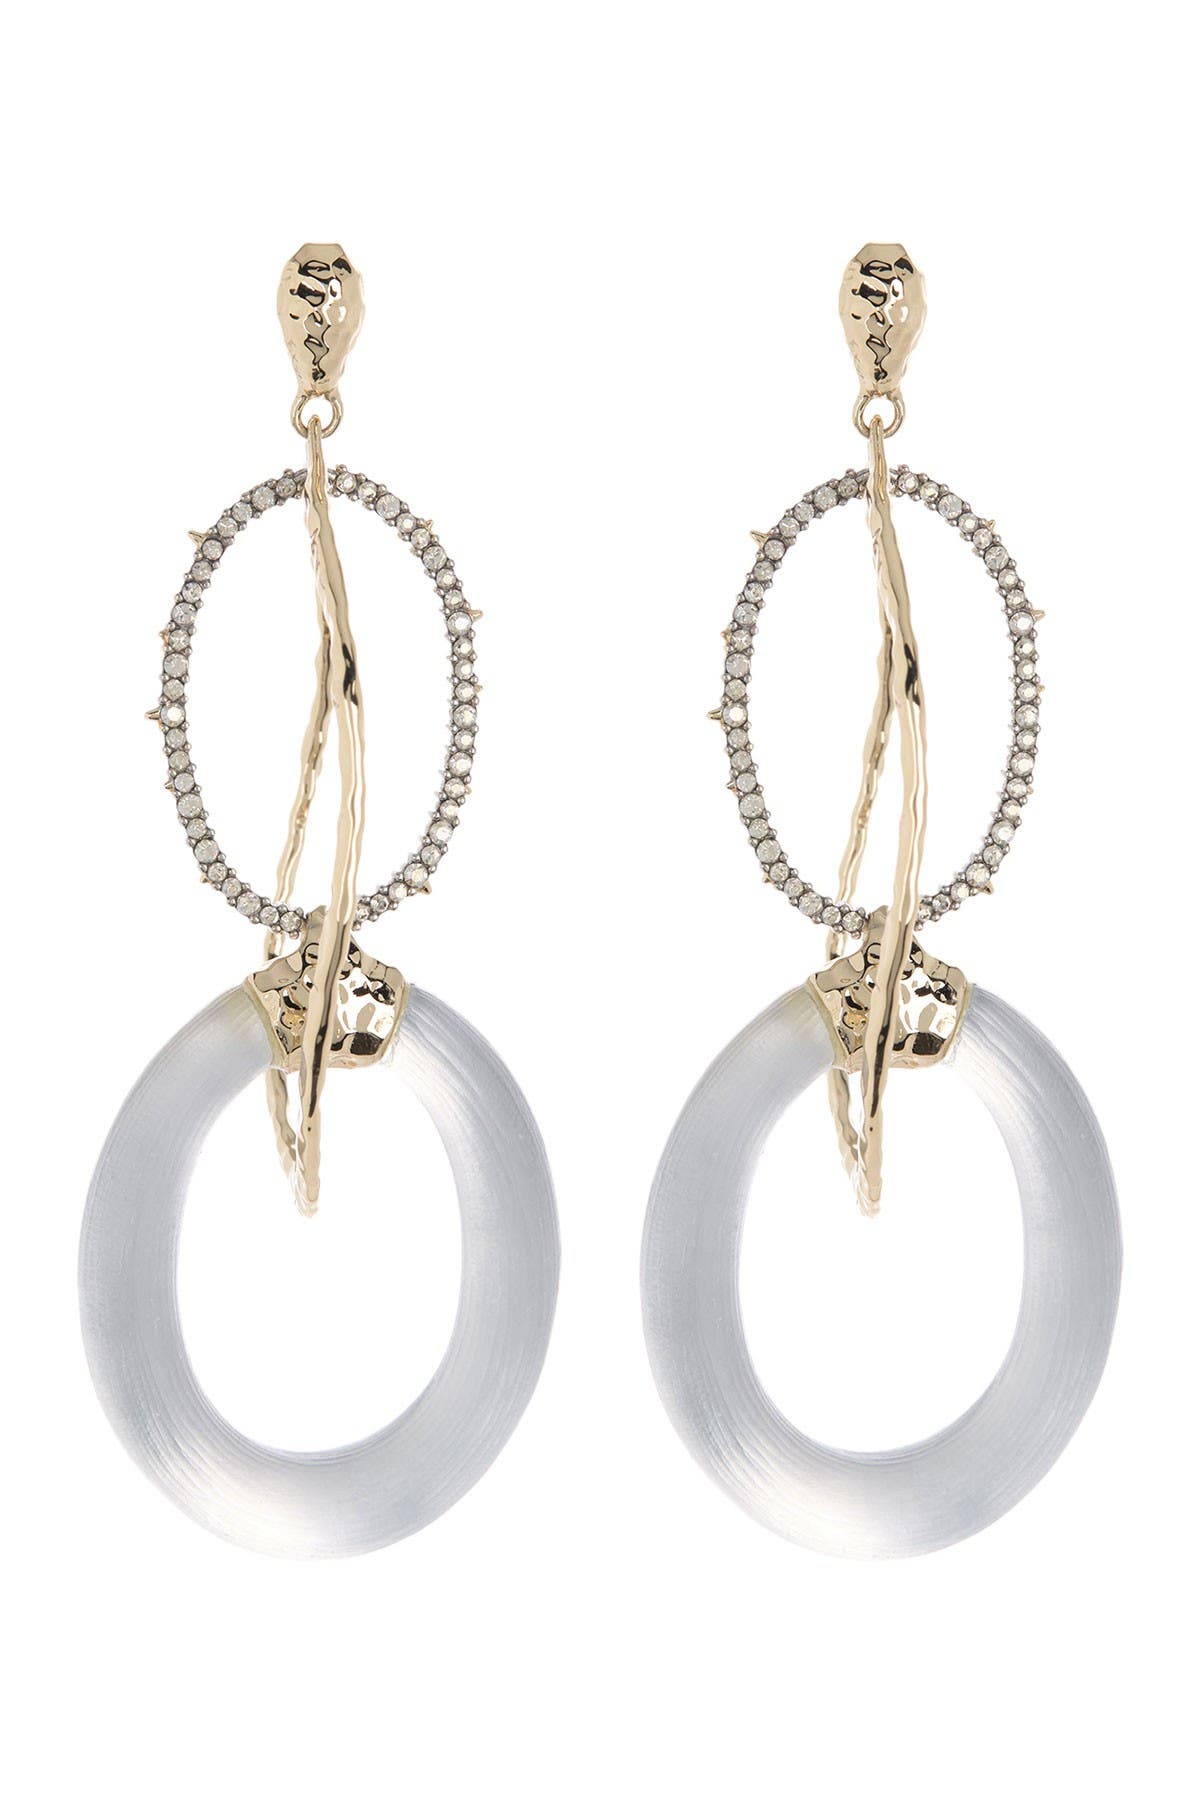 Alexis Bittar Hammered Orbital Crystal Accented Drop Earrings In Silver